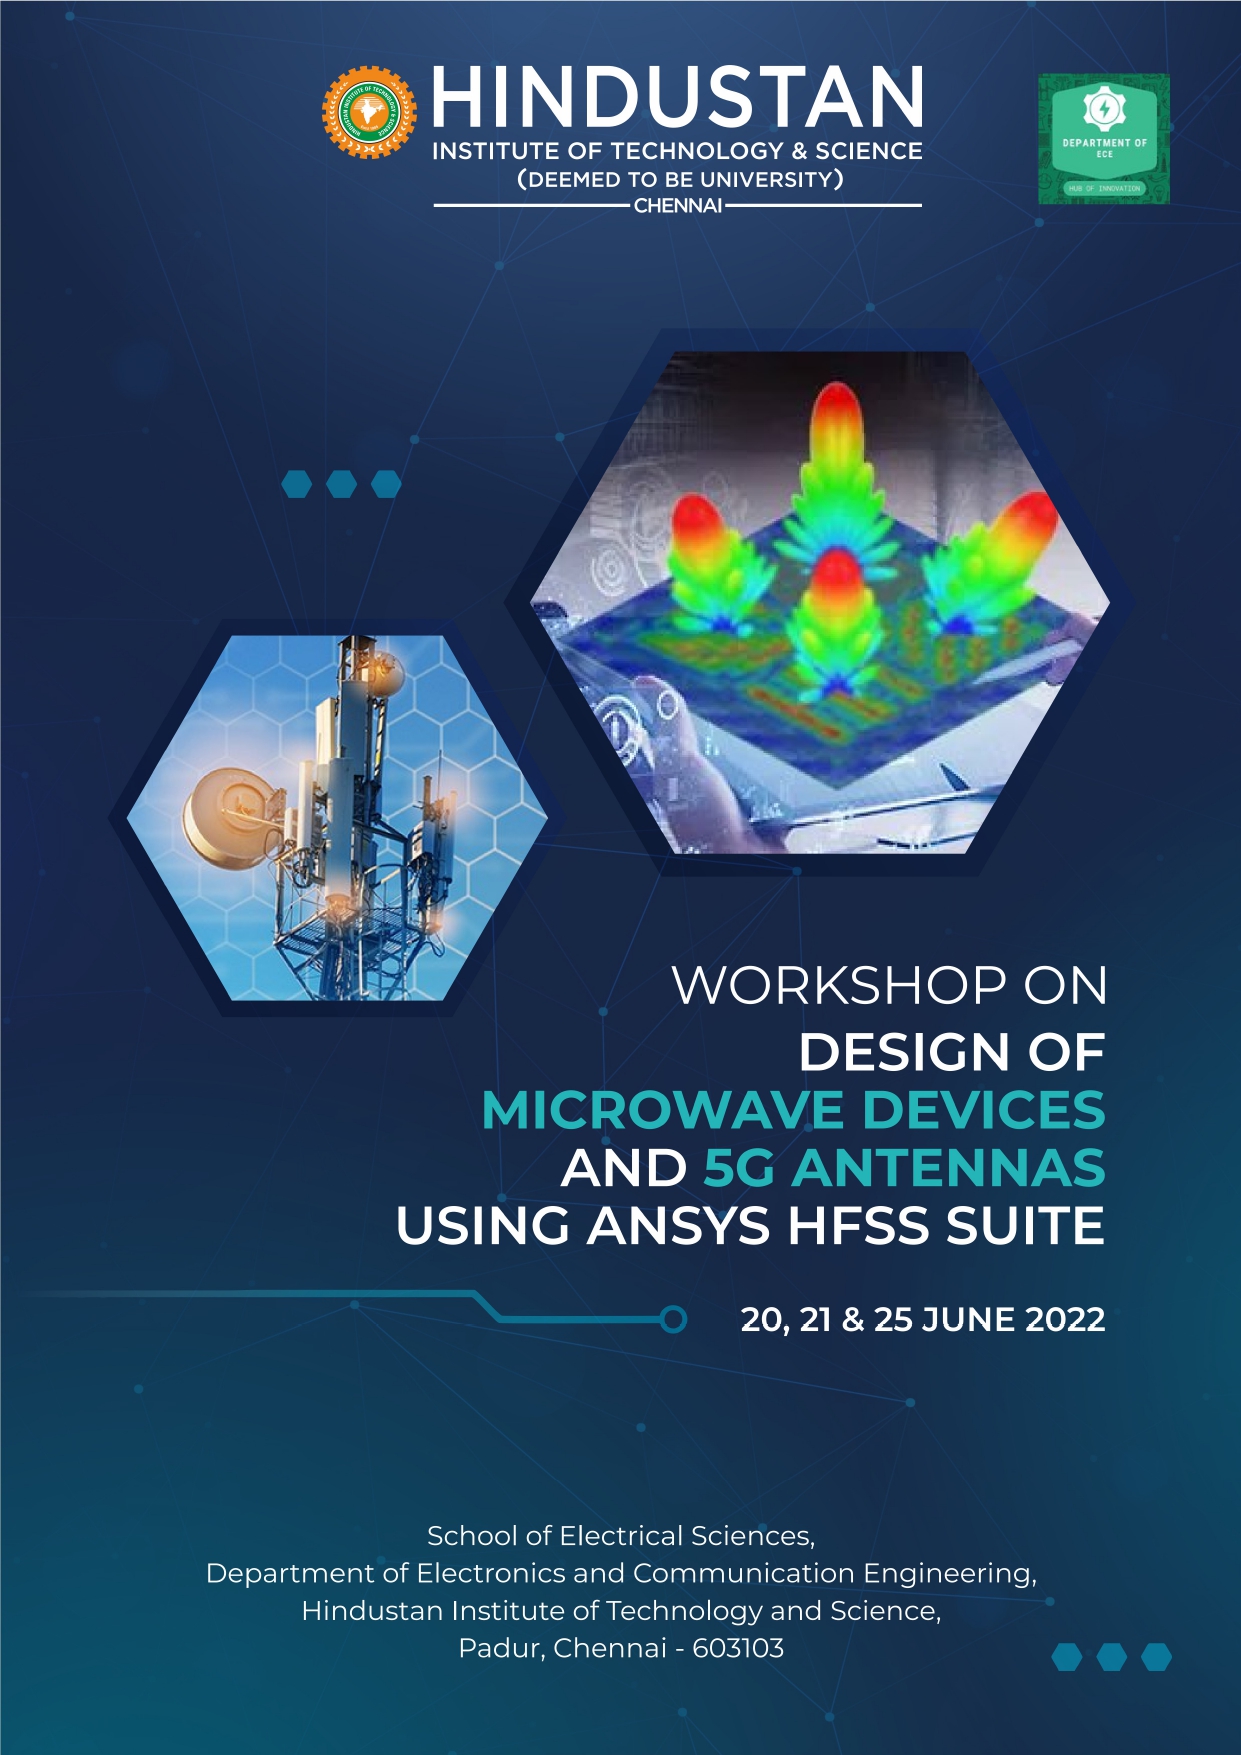 Workshop on Design of Microwave Devices and 5G Antennas using HFSS Suite